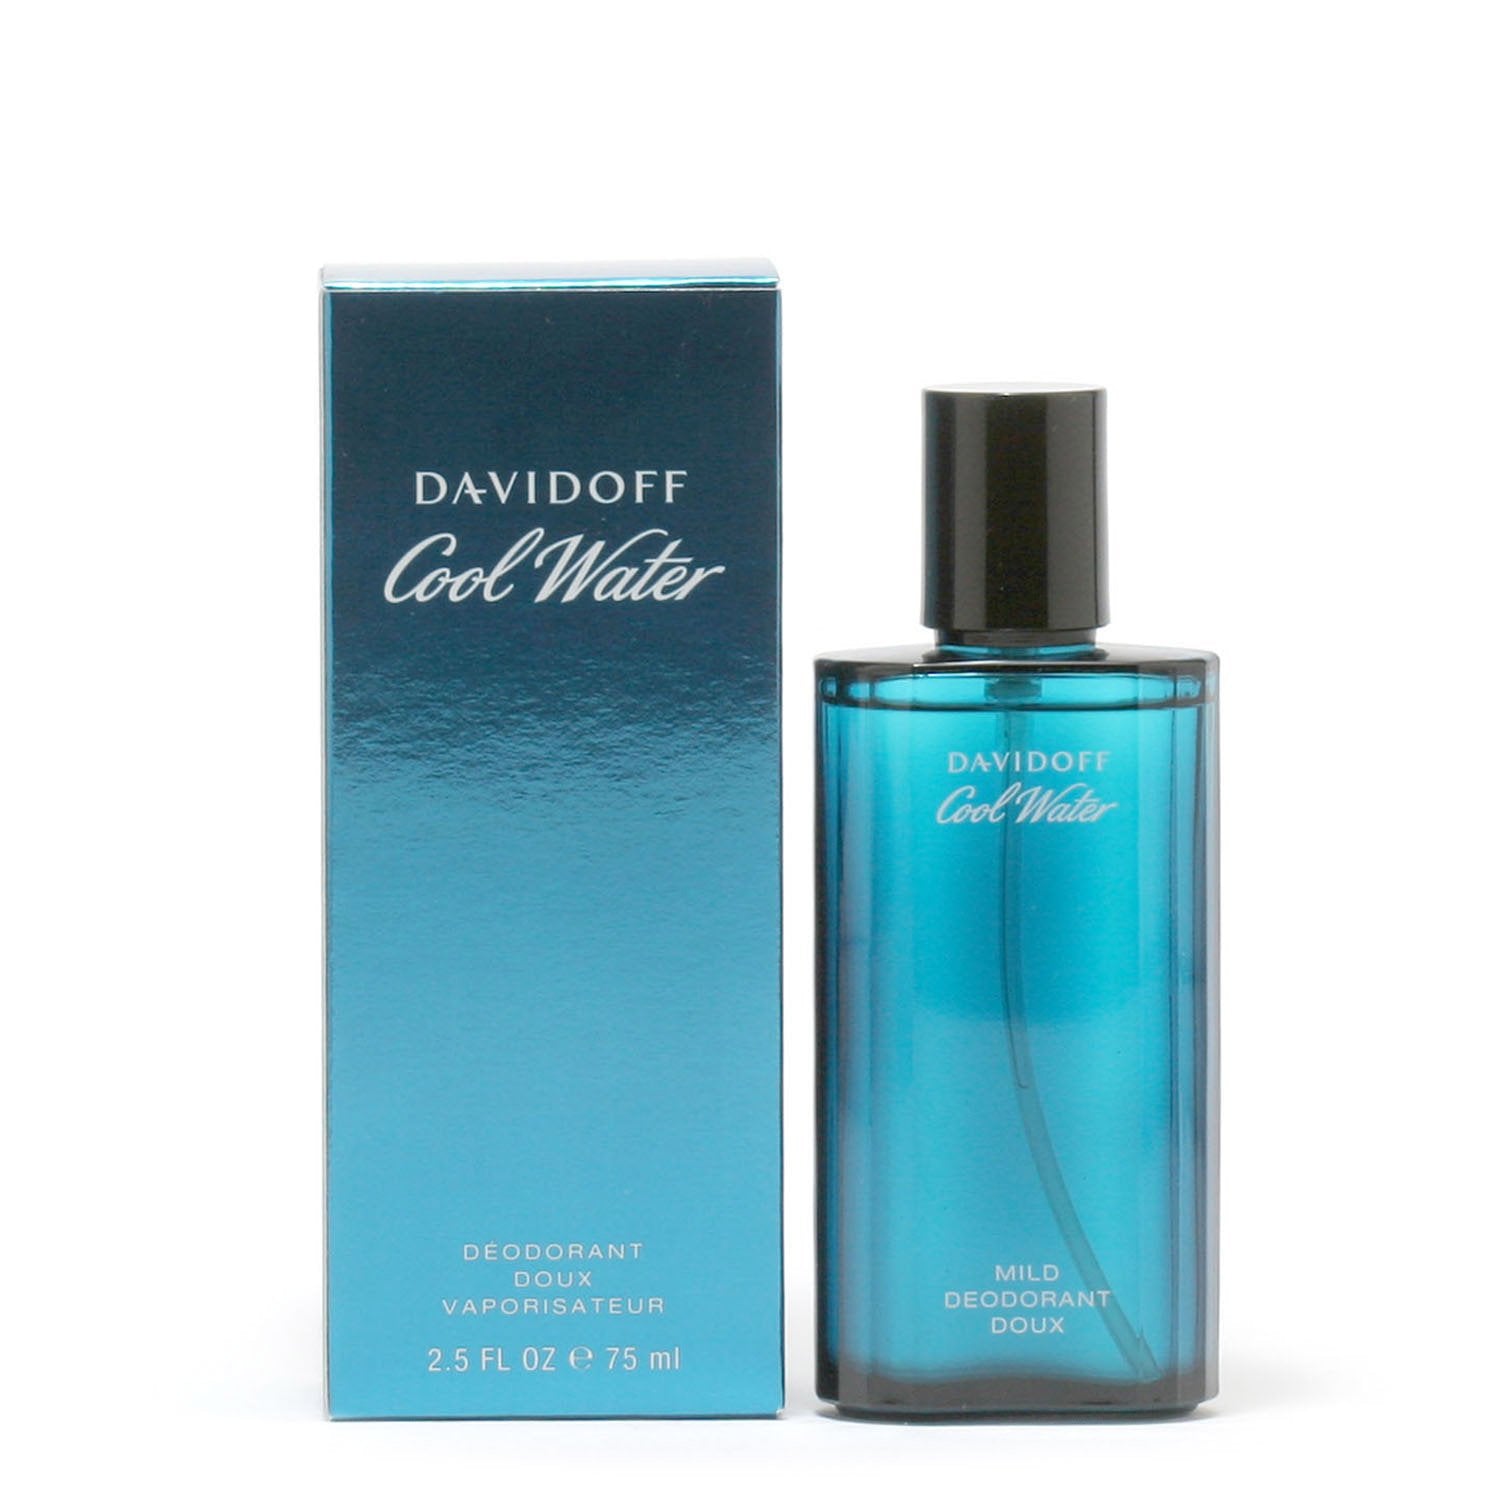 COOL WATER FOR MEN BY DAVIDOFF - DEODORANT 2.5 – Fragrance